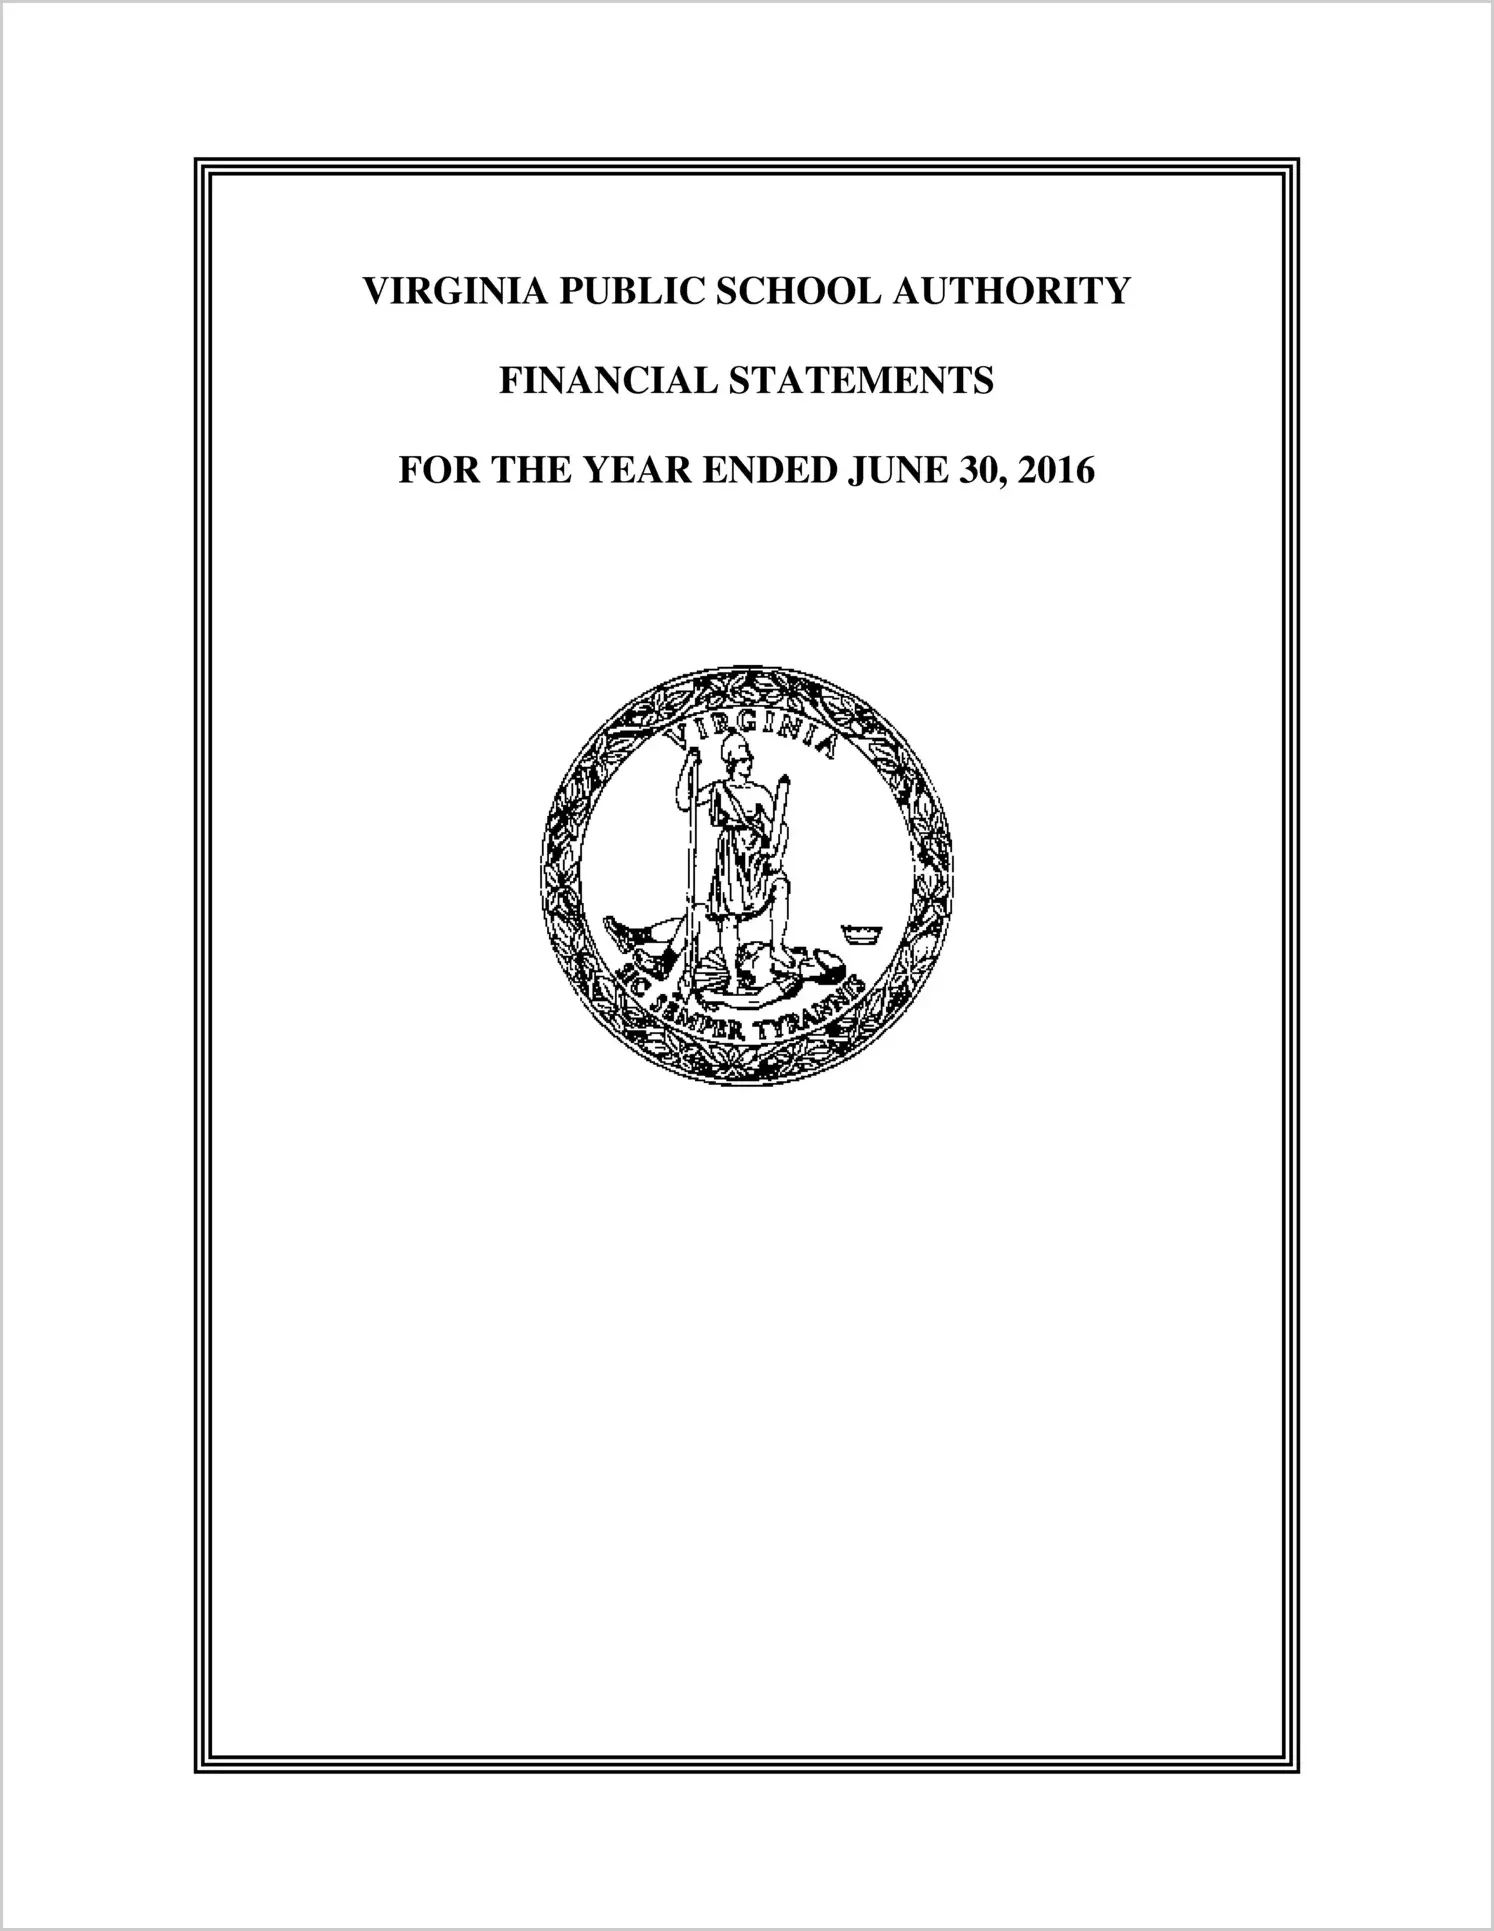 Virginia Public School Authority Financial Statements for the Year Ended June 30, 2016